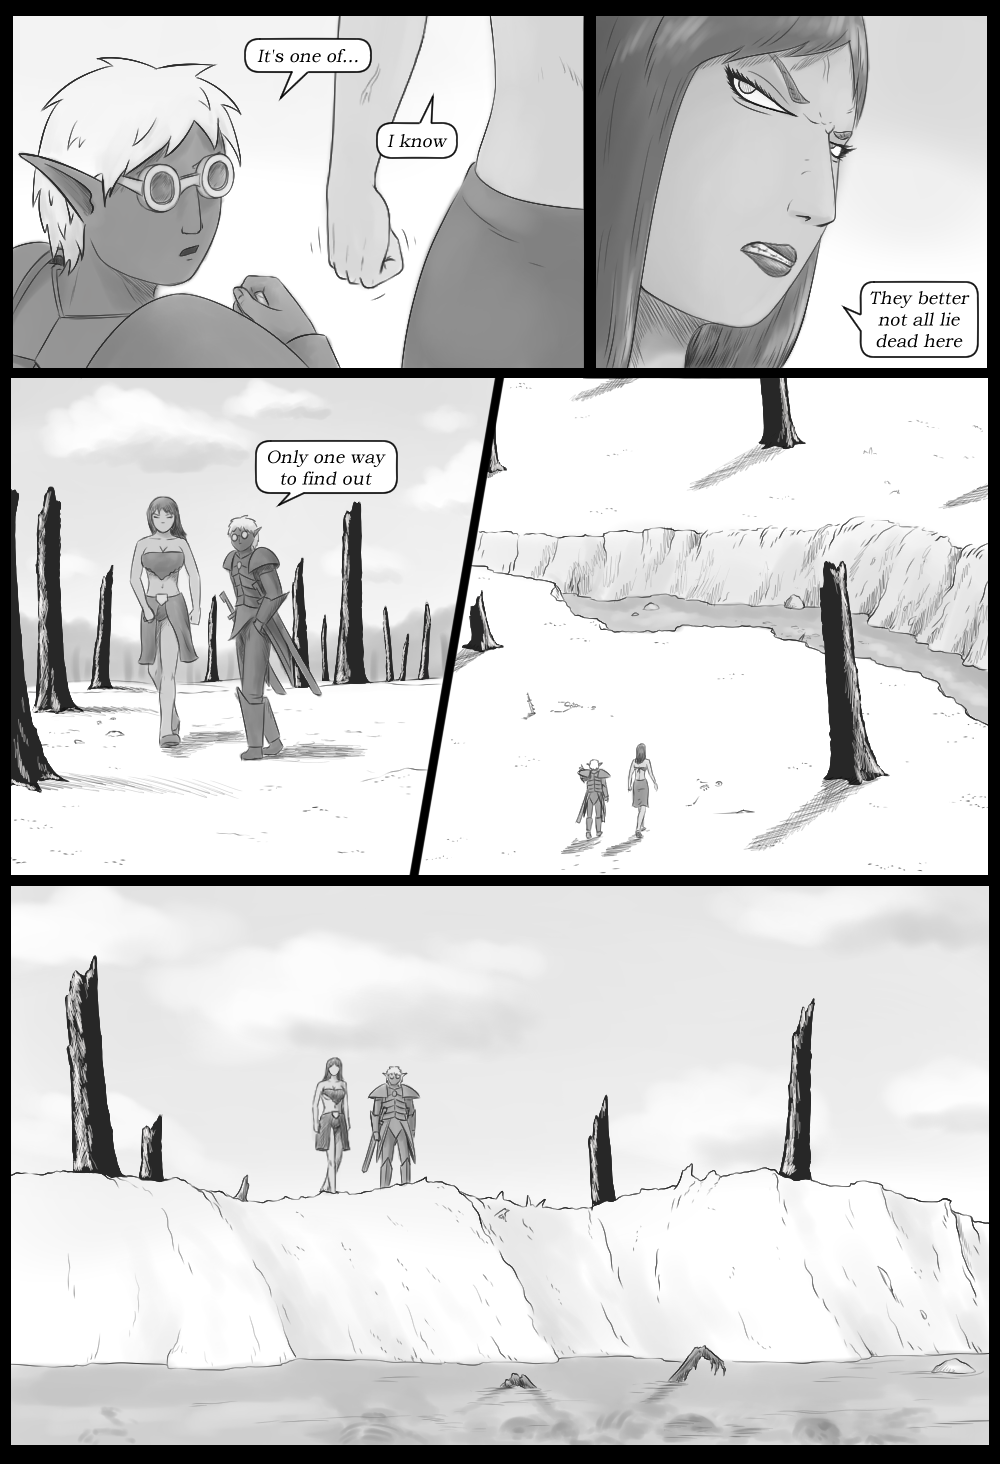 Page 39 - Search for the Clues (Part 4)